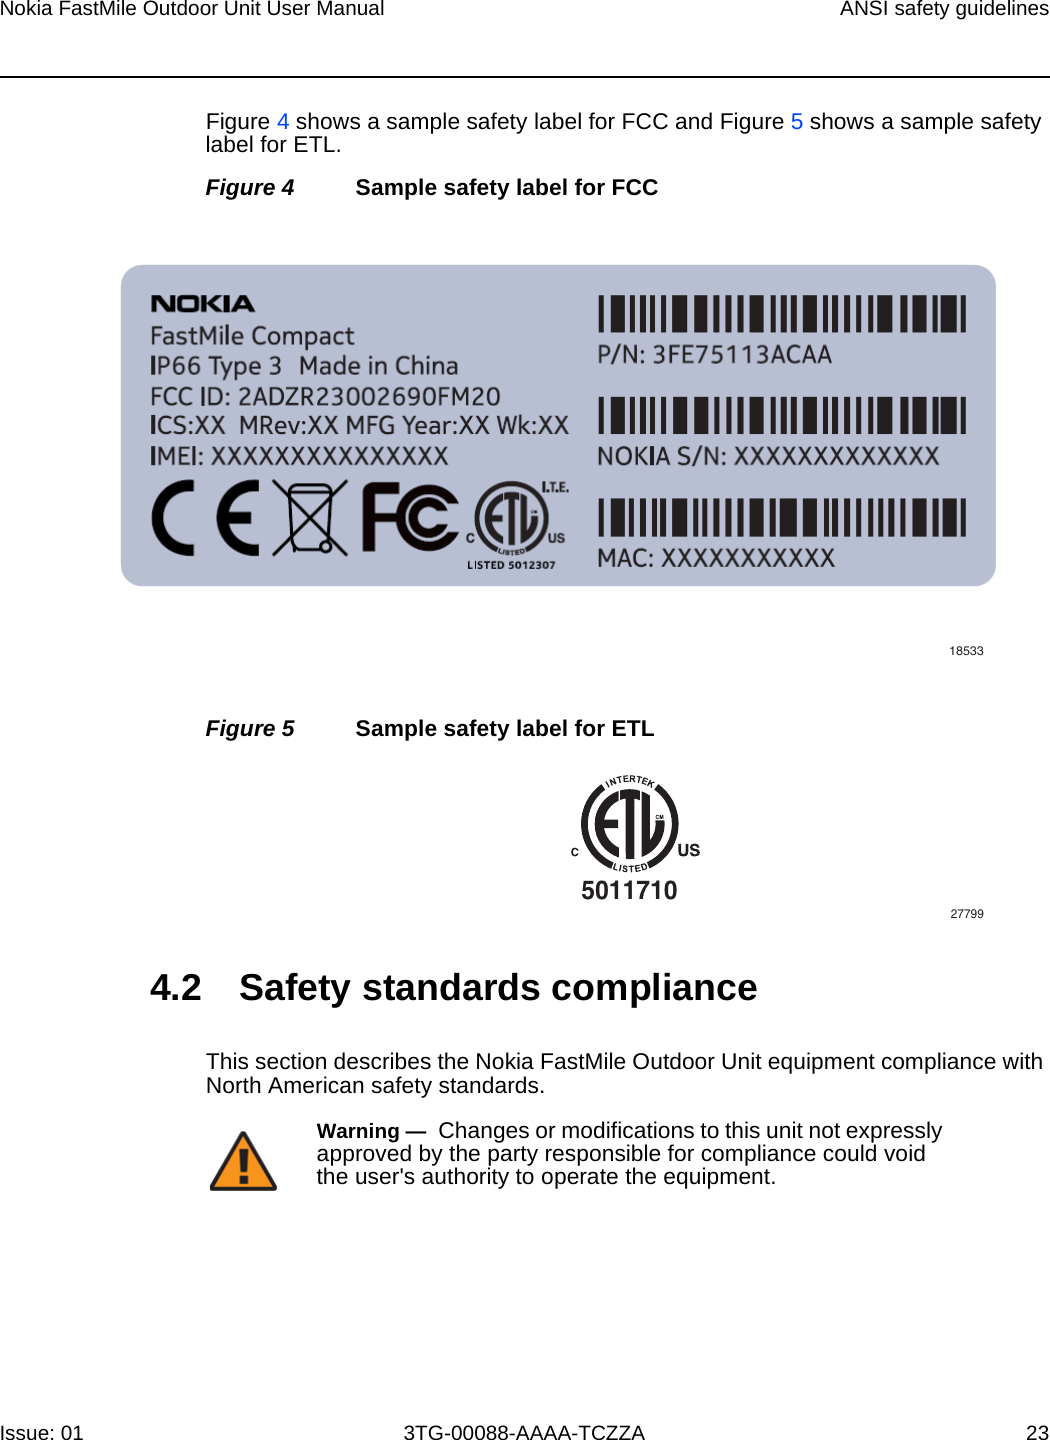 Nokia FastMile Outdoor Unit User Manual ANSI safety guidelinesIssue: 01 3TG-00088-AAAA-TCZZA 23Figure 4 shows a sample safety label for FCC and Figure 5 shows a sample safety label for ETL.Figure 4 Sample safety label for FCCFigure 5 Sample safety label for ETL4.2 Safety standards complianceThis section describes the Nokia FastMile Outdoor Unit equipment compliance with North American safety standards.18533501171027799Warning —  Changes or modifications to this unit not expressly approved by the party responsible for compliance could void the user&apos;s authority to operate the equipment.